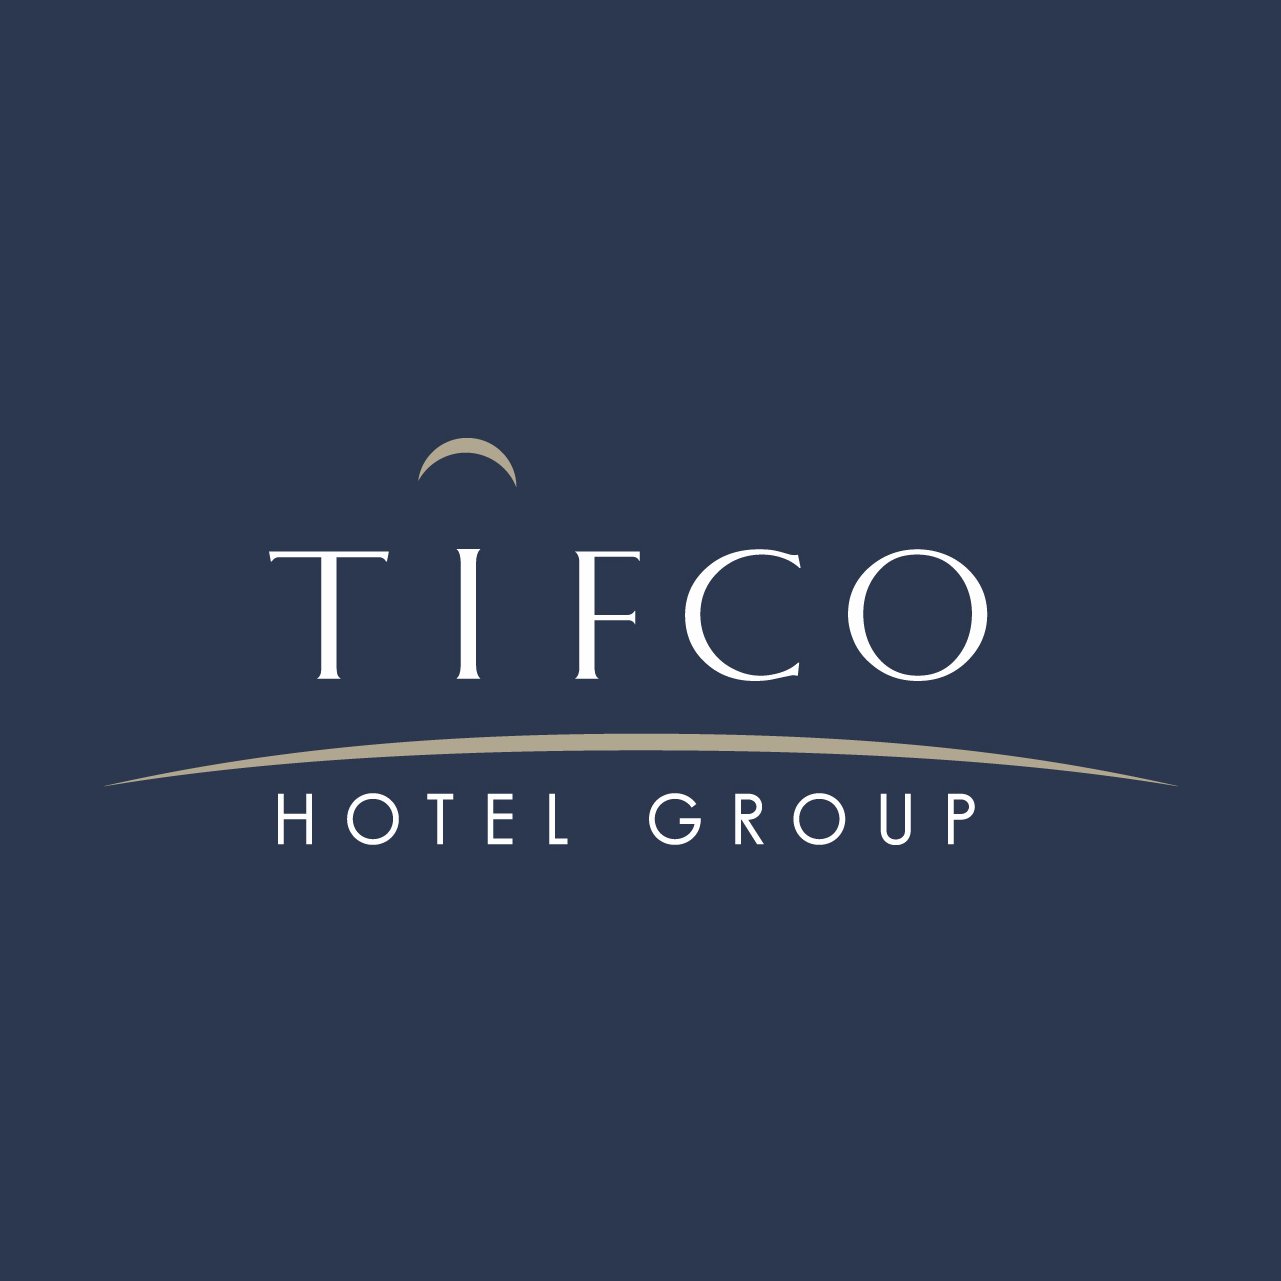 Tifco Hotel Group is Ireland's number one choice for #Conferences, #Meetings & #Events and is Ireland's second largest hotel group with over 24 #Hotels